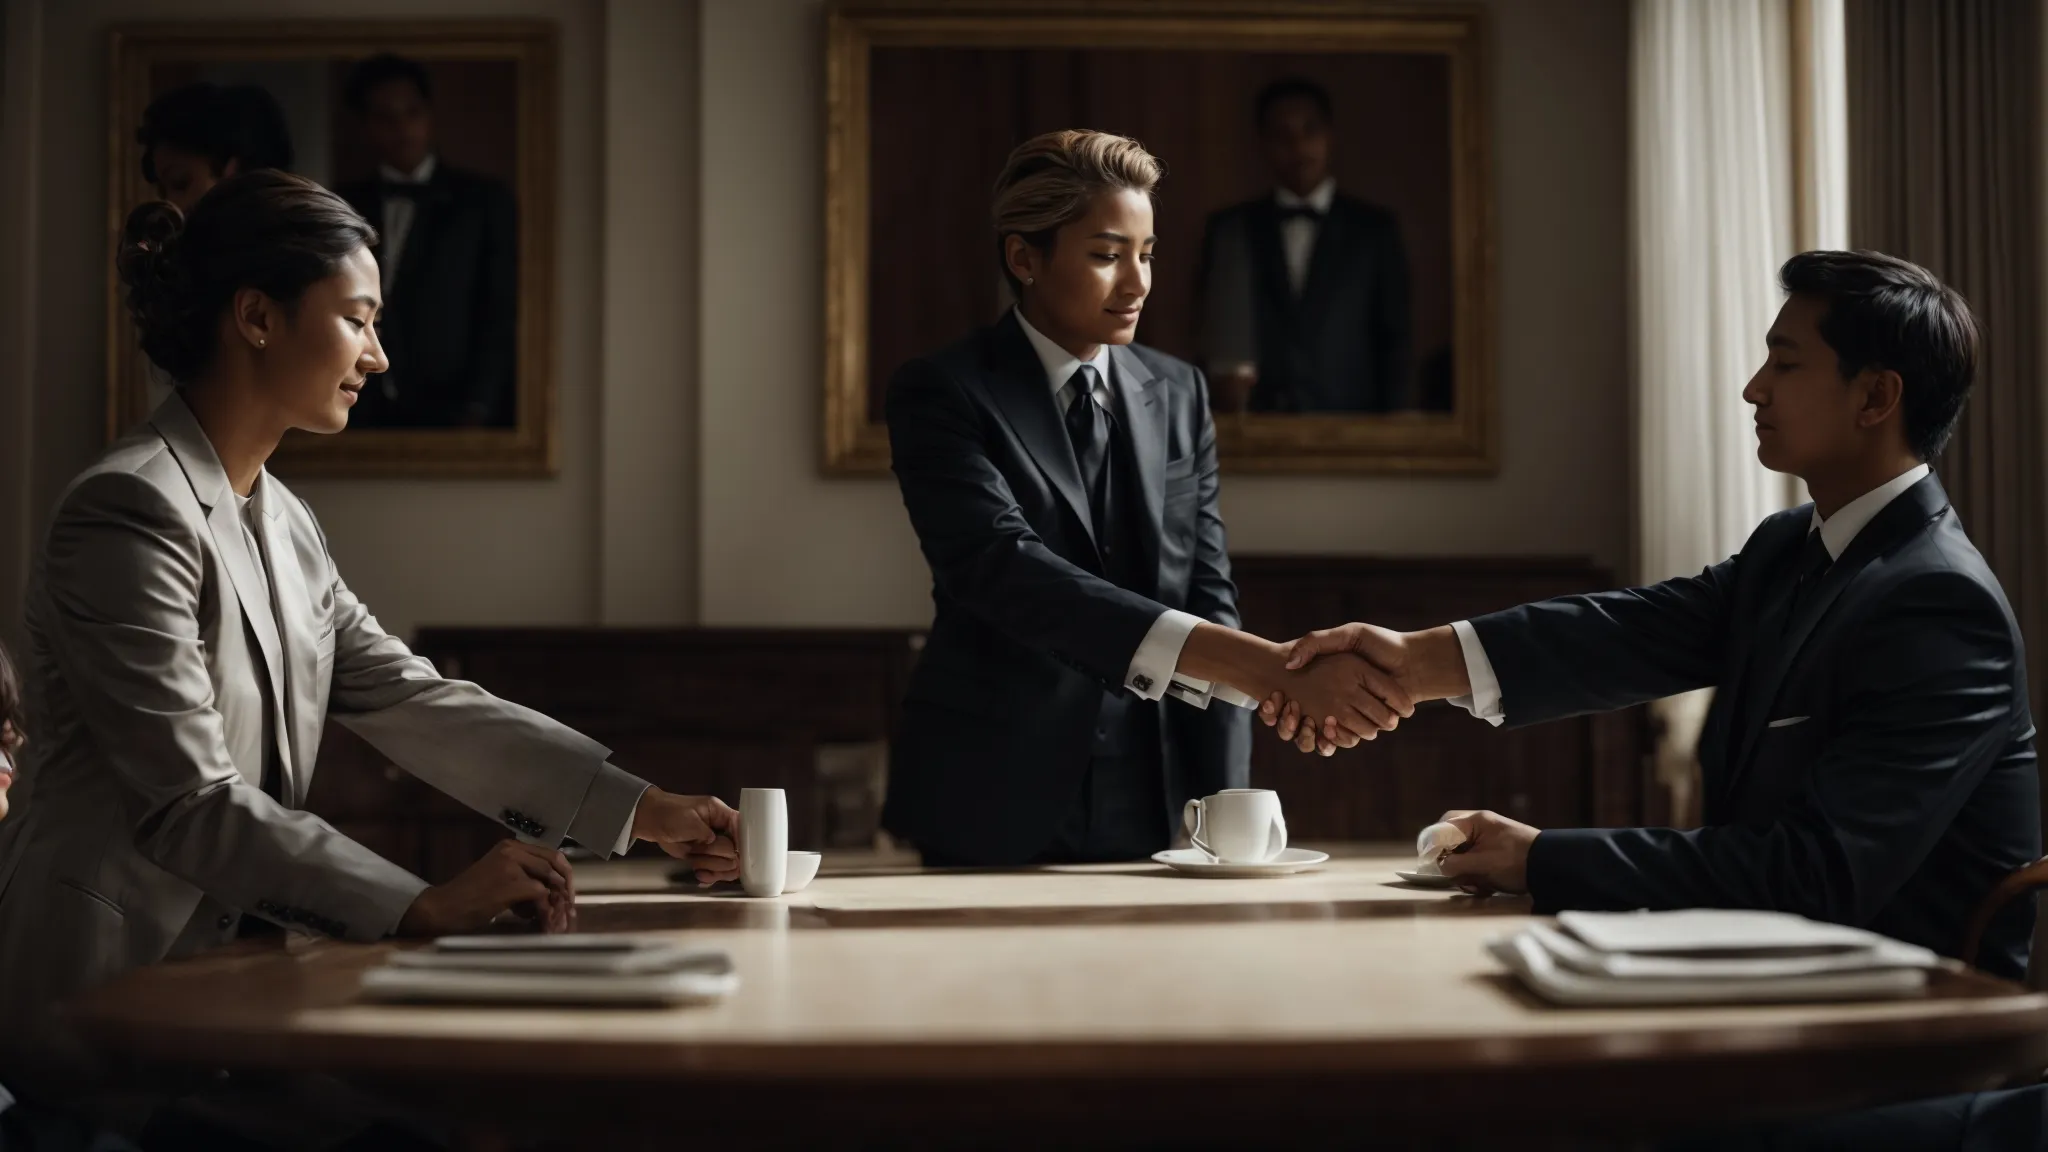 two people in formal attire are shaking hands across a table while a third observes, symbolizing agreement and witness to a contract.